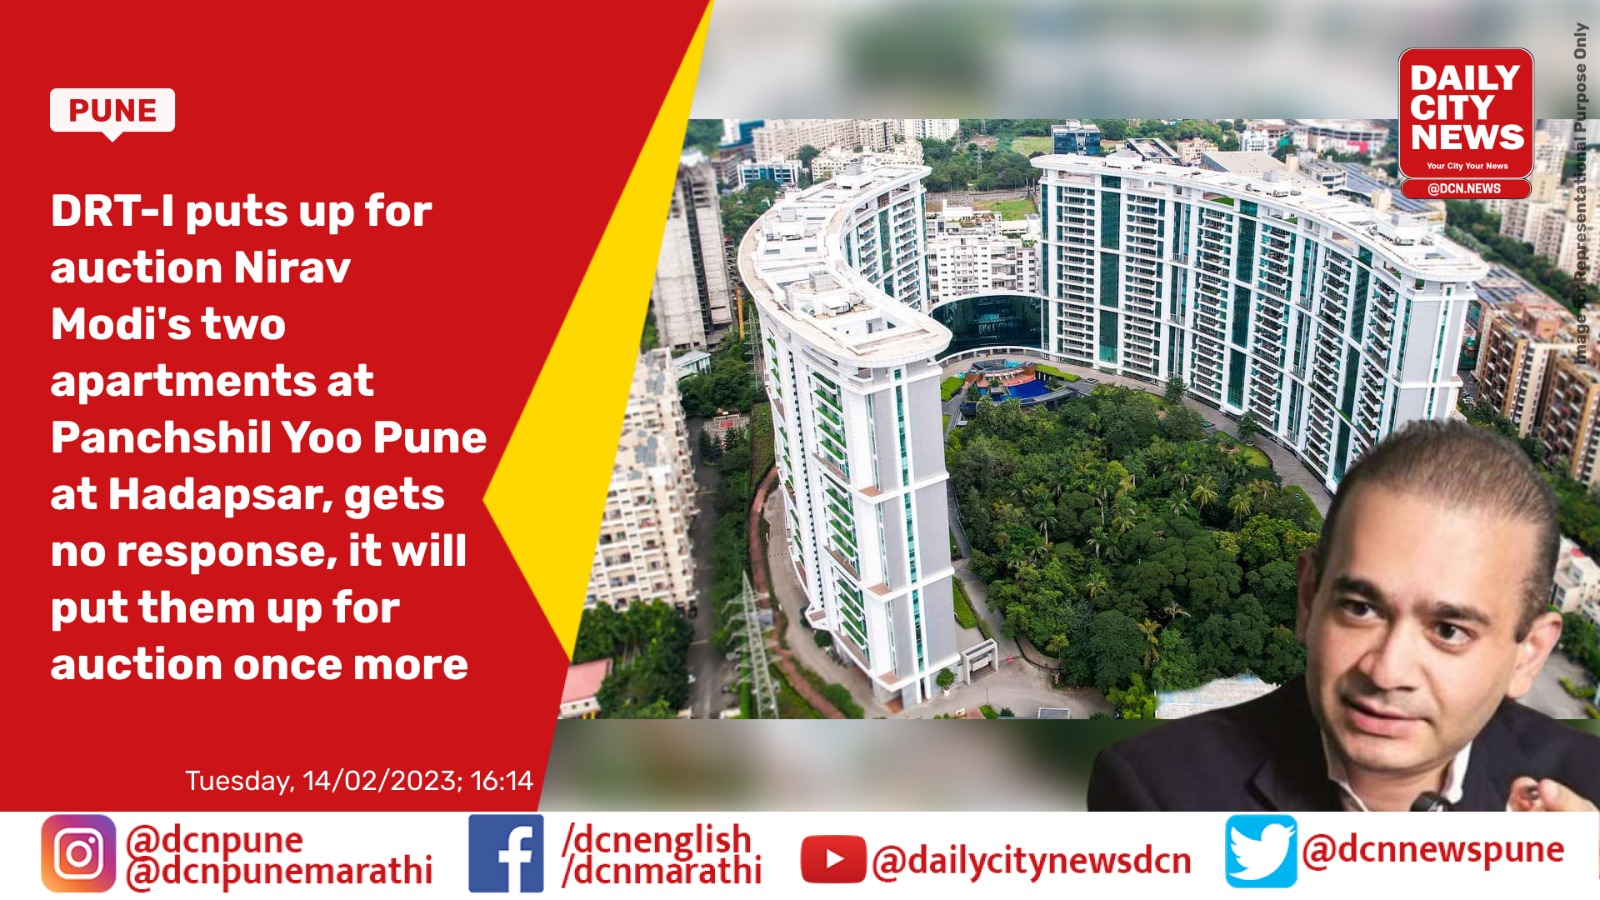 DRT-I puts up for auction Nirav Modi's two apartments at Panchshil Yoo Pune at Hadapsar, gets no response, it will put them up for auction once more